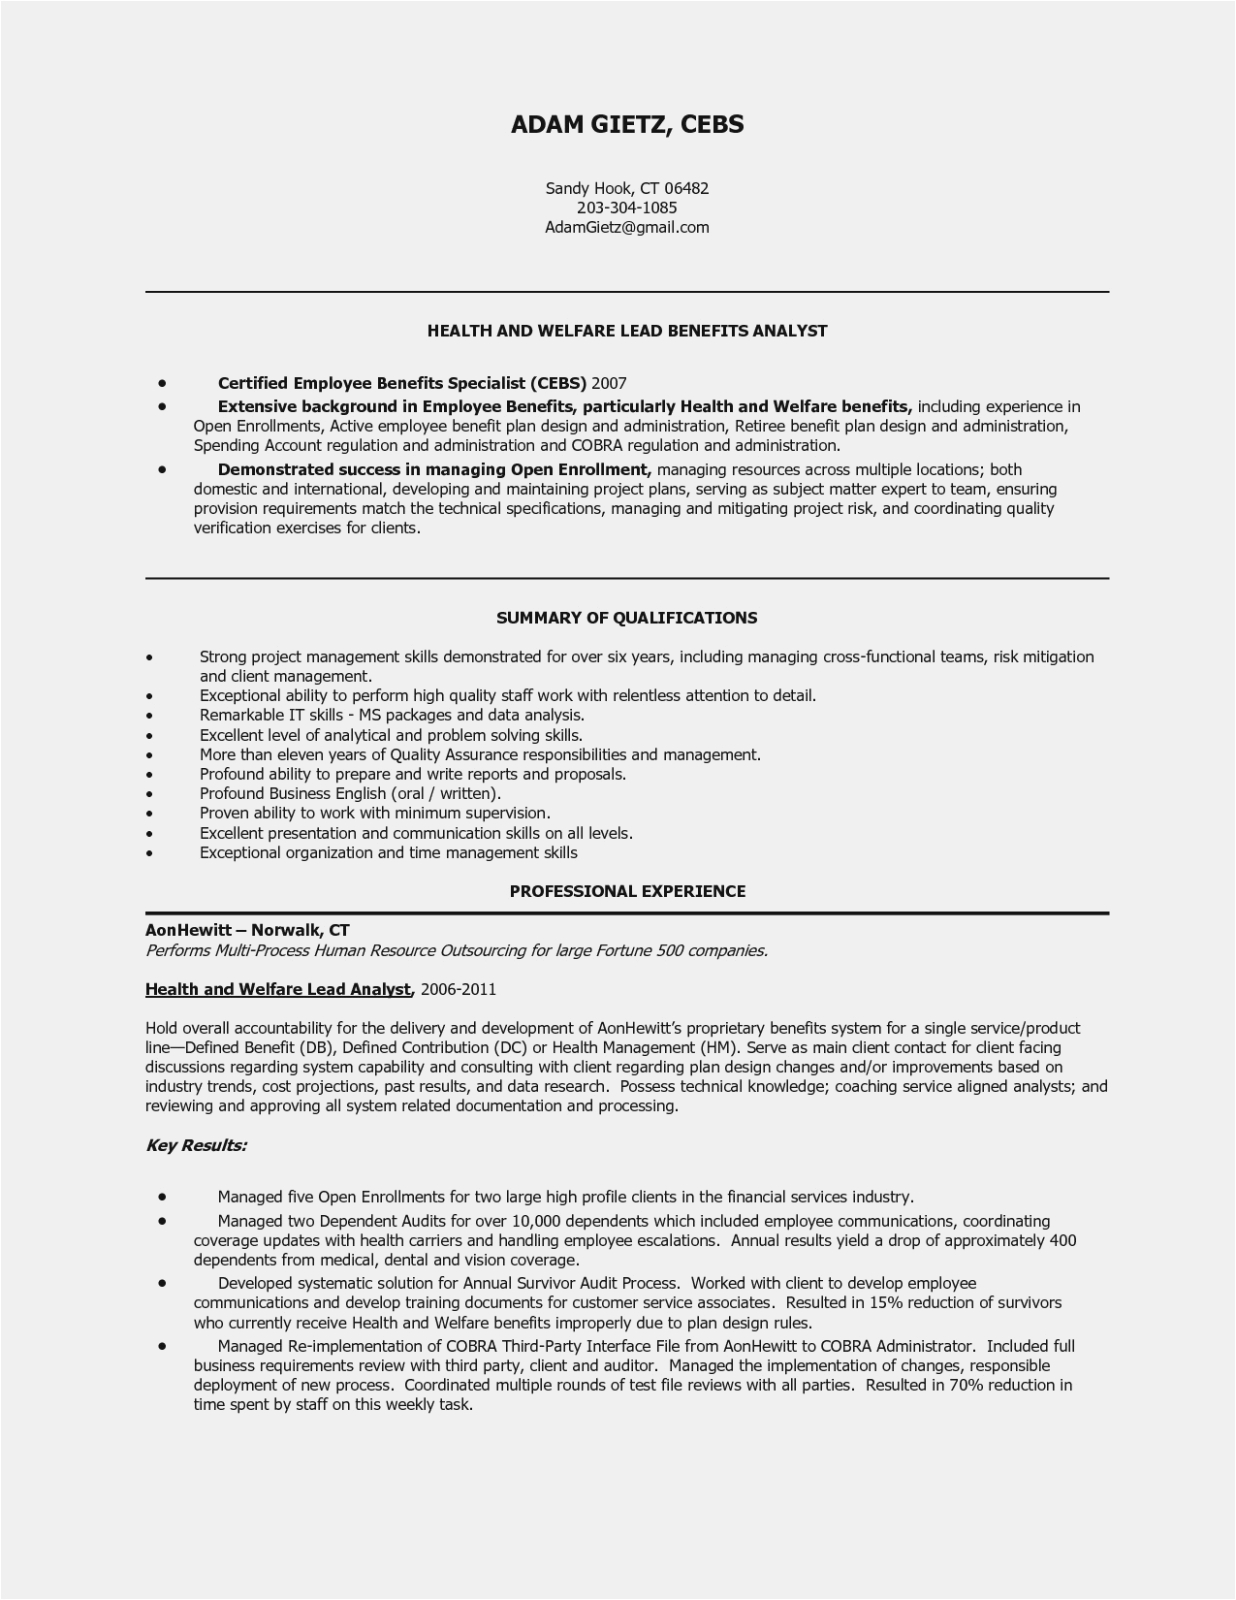 Sample Resume for A Retired Person 10 Things You Didn’t Know About Retiree Resume Examples